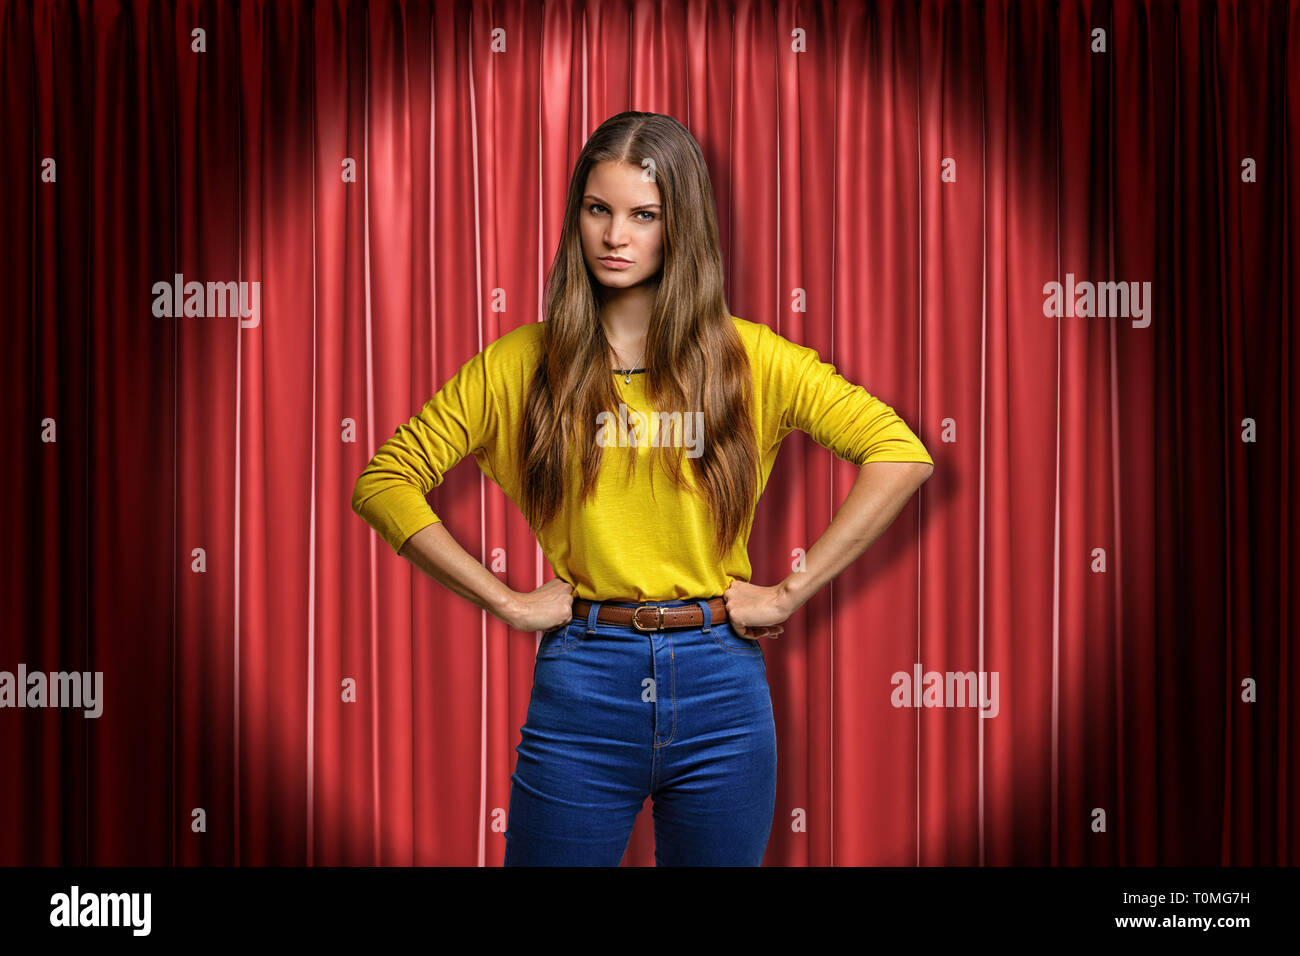 Young angry woman wearing jeans and yellow shirt on red stage curtains background Stock Photo